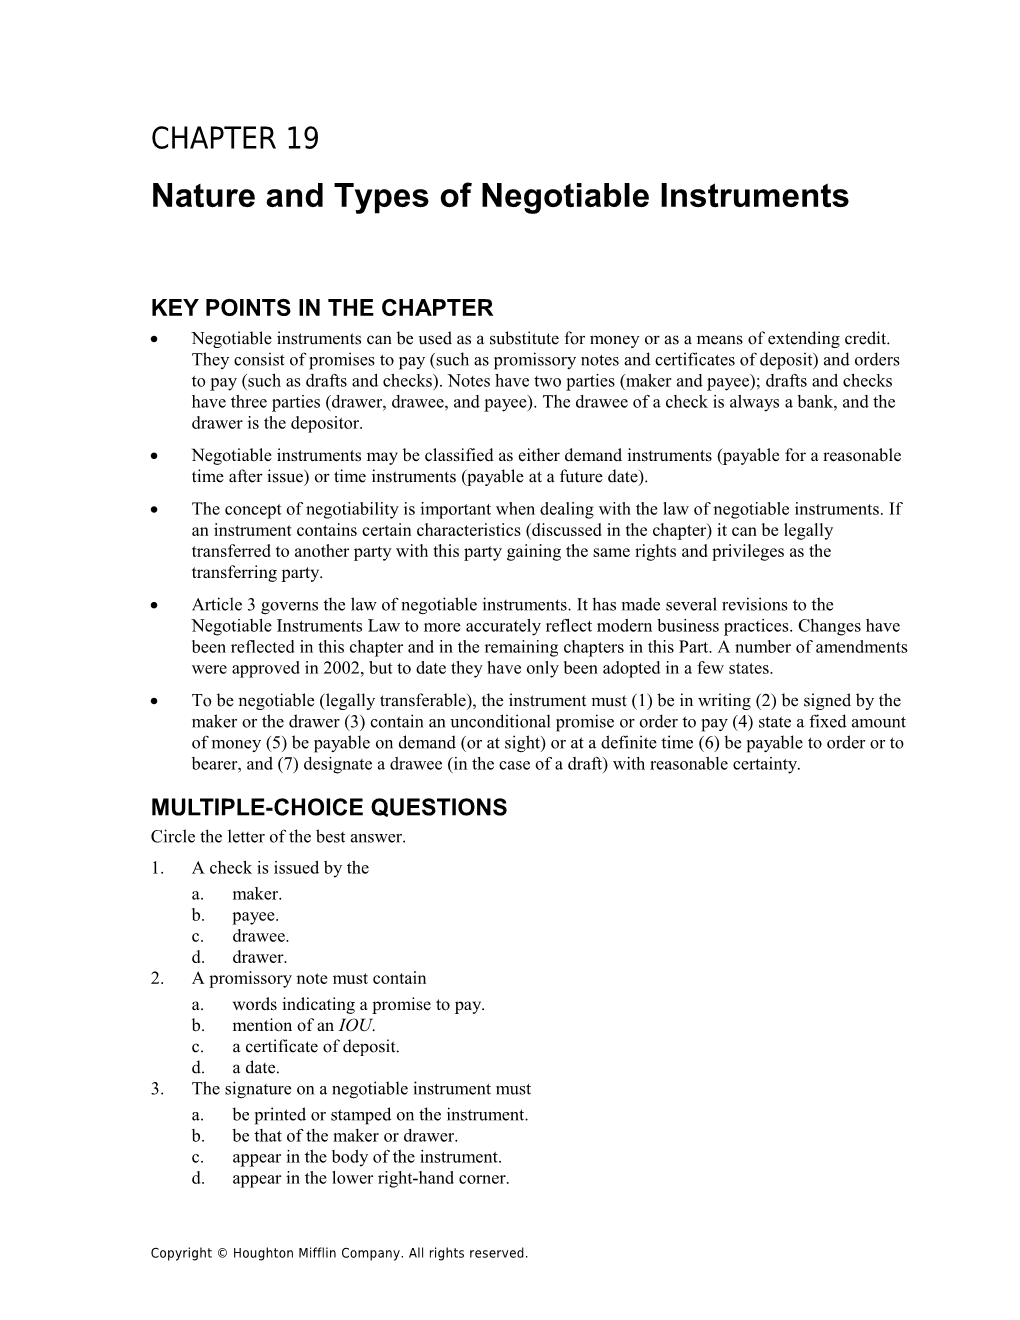 Chapter 19: Nature and Types of Negotiable Instruments 1